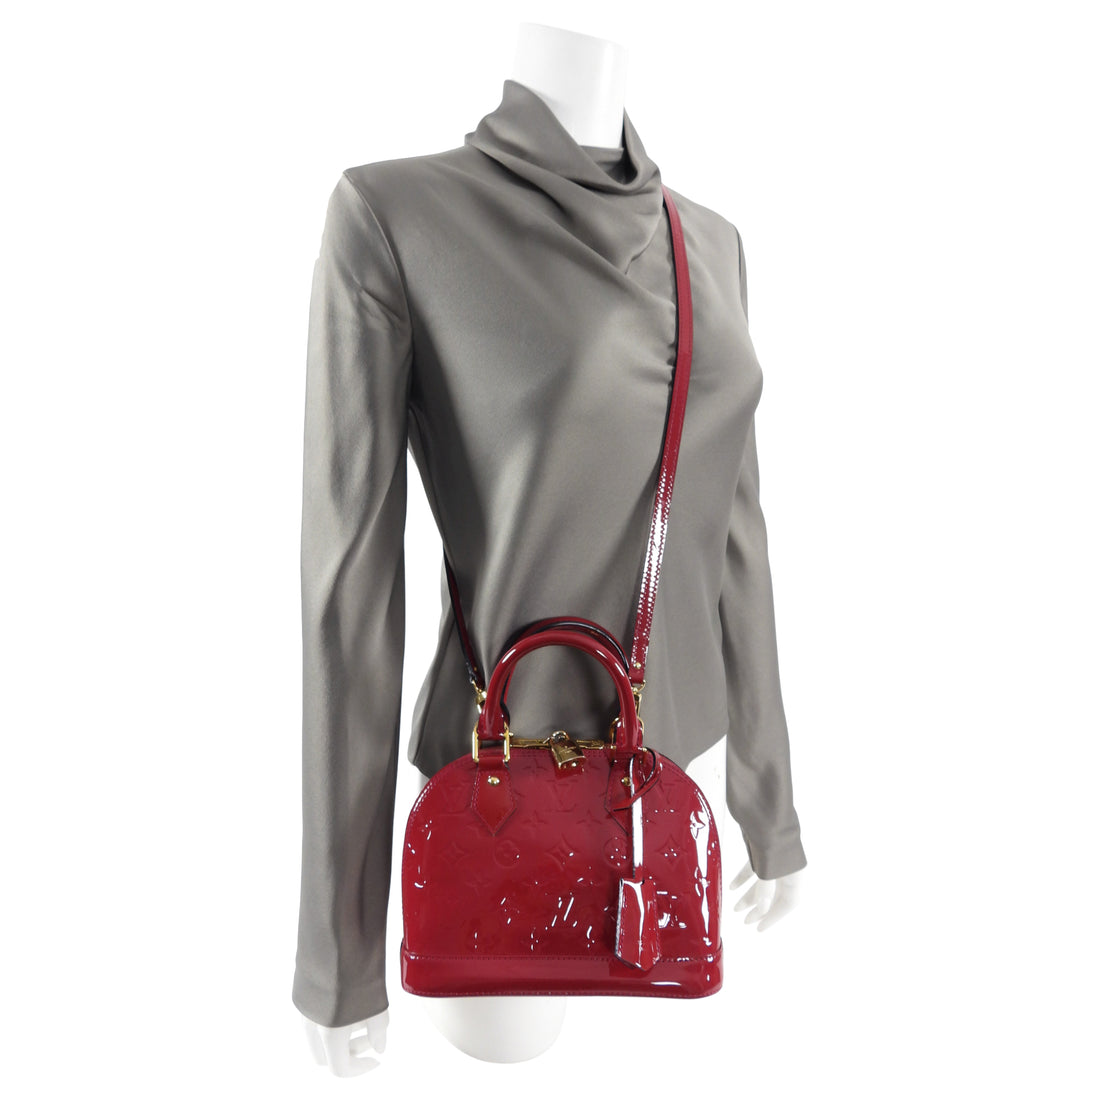 Louis Vuitton Alma Vernis Bb Rose Indien Red Patent Leather, 56% OFF